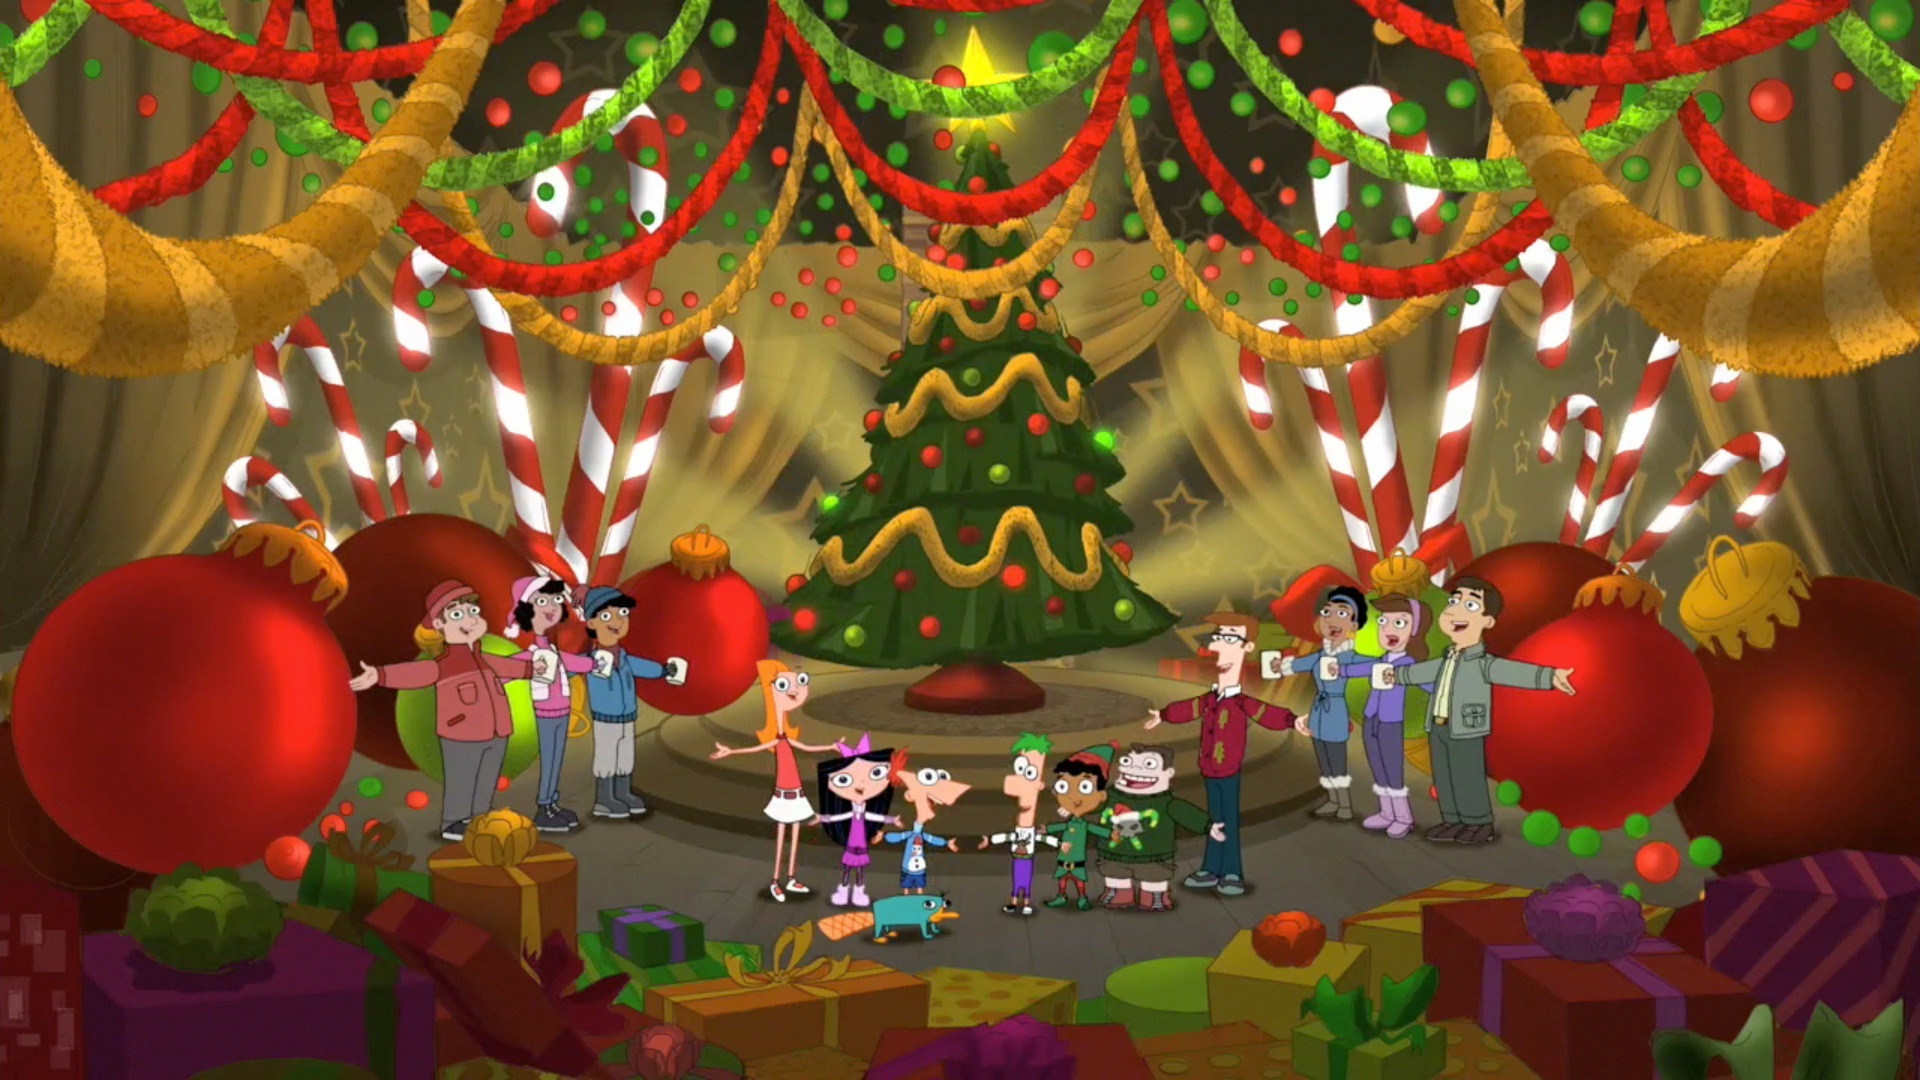 https://img3.wikia.nocookie.net/__cb20111206053140/phineasandferb/images/7/7f/We_wish_you_a_merry_christmas_35.jpg